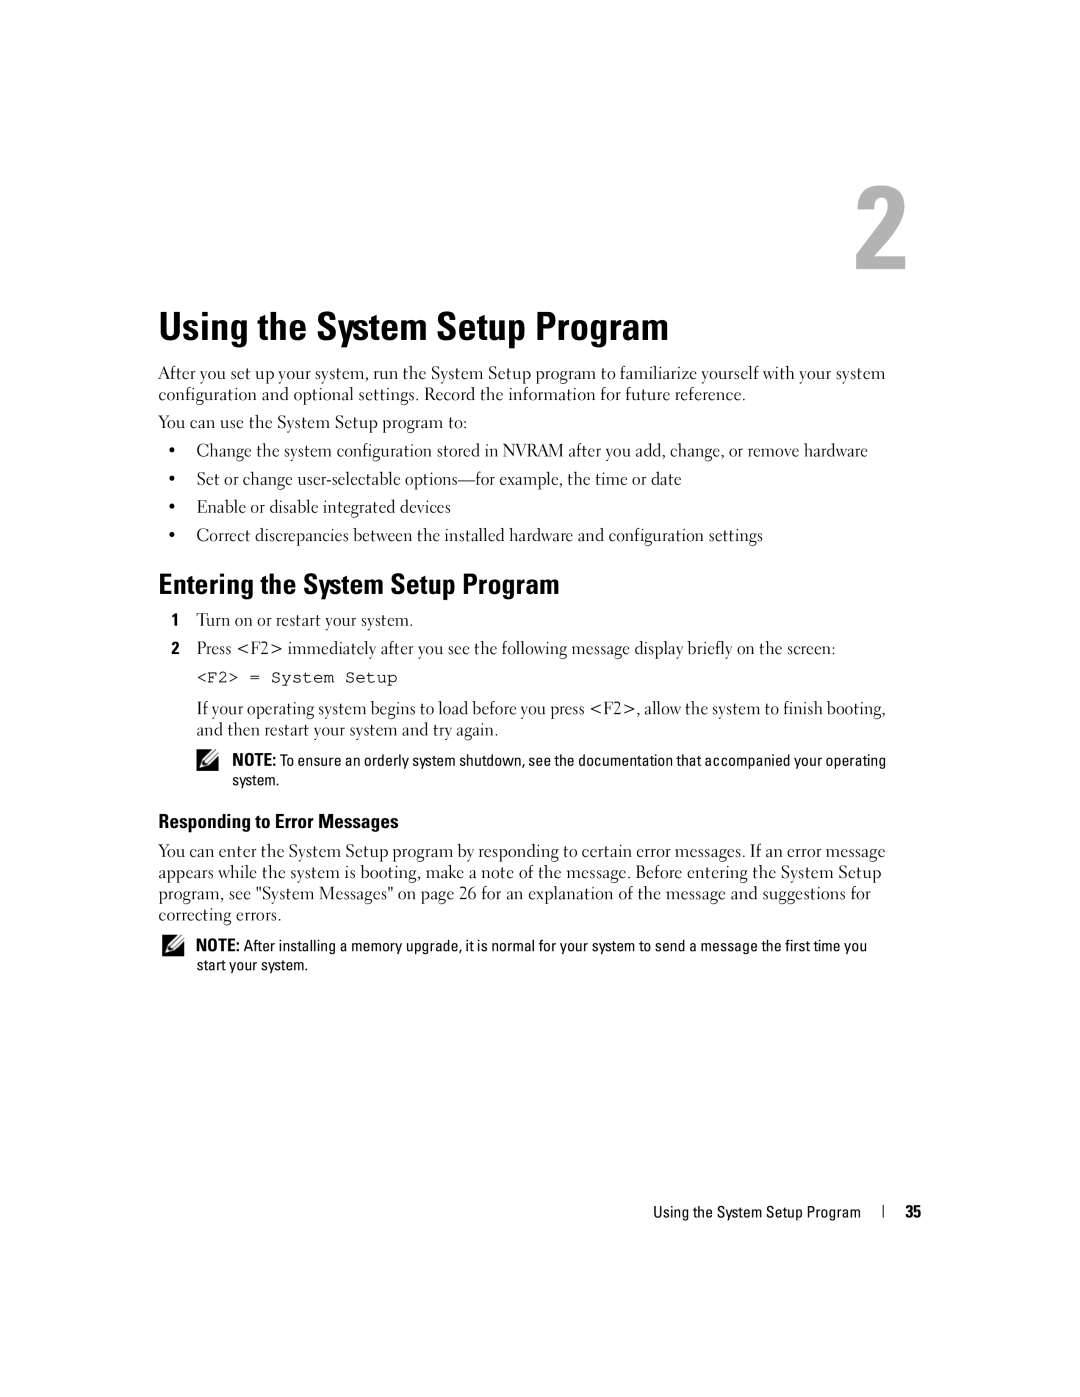 Dell 2900 owner manual Using the System Setup Program, Entering the System Setup Program, Responding to Error Messages 